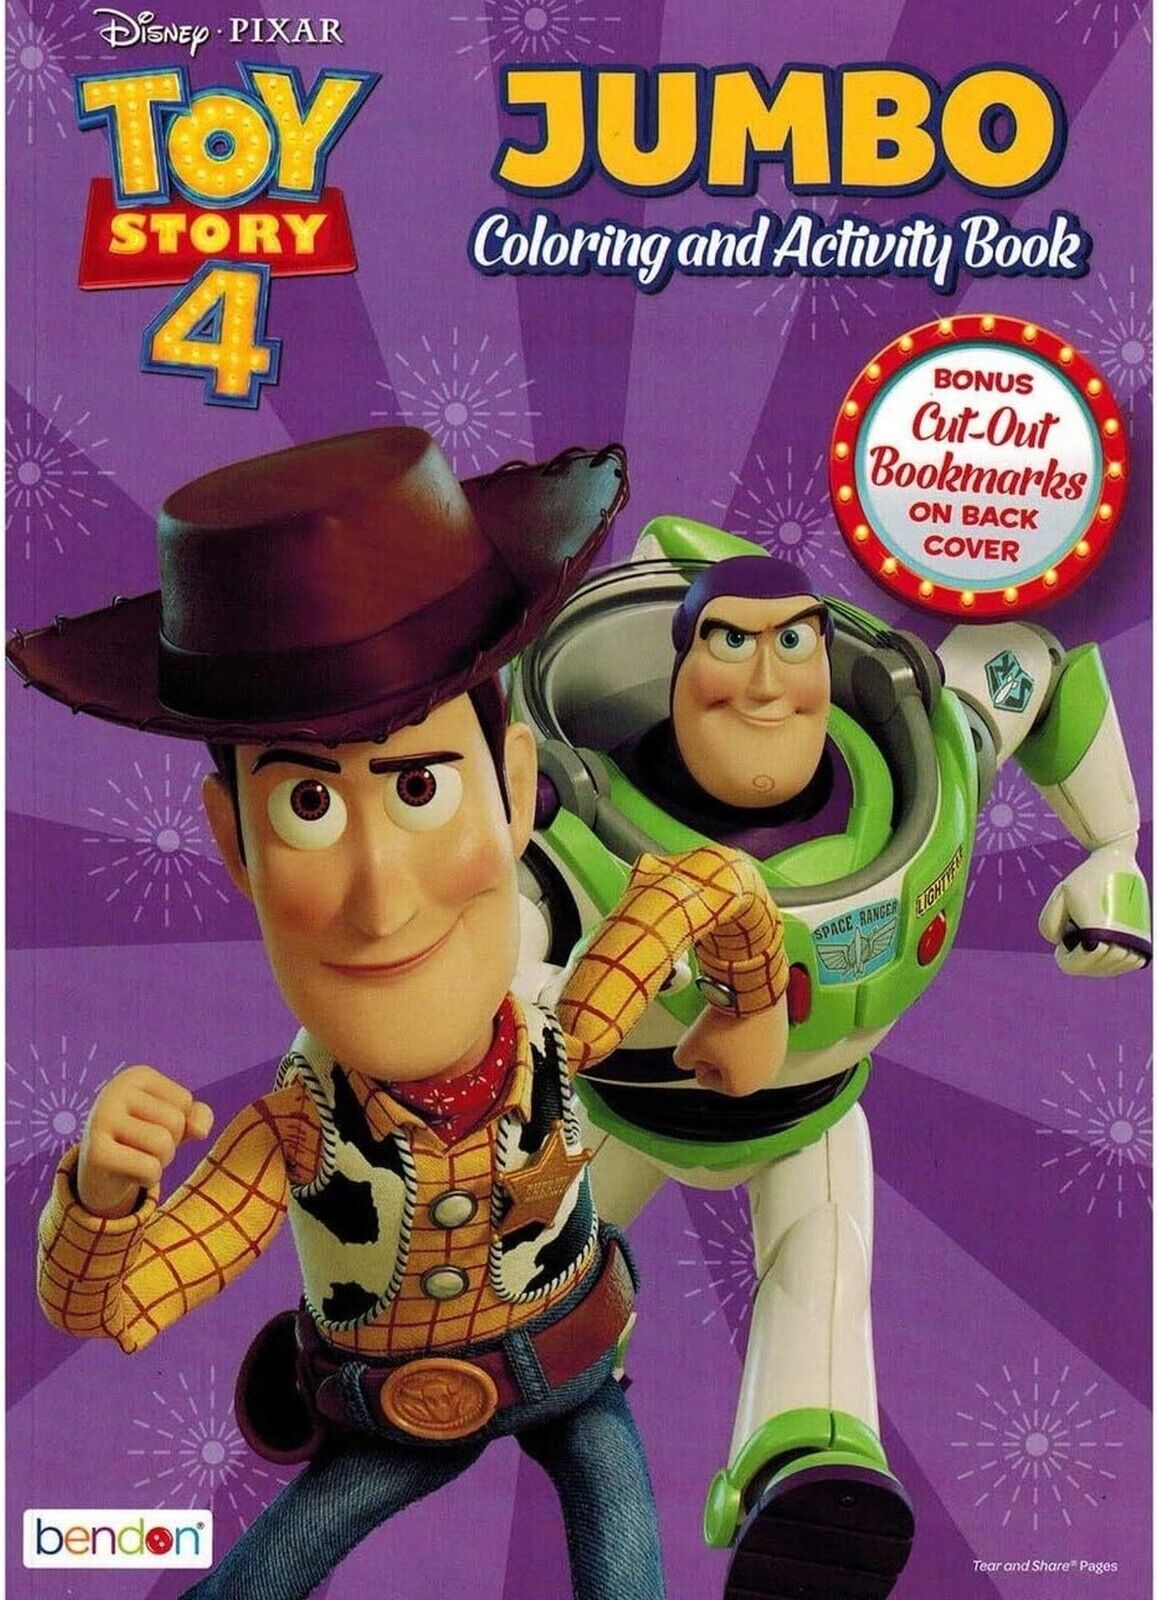 Toy Story 4 - Jumbo Coloring & Activity Book (Set of 2 Books) v2